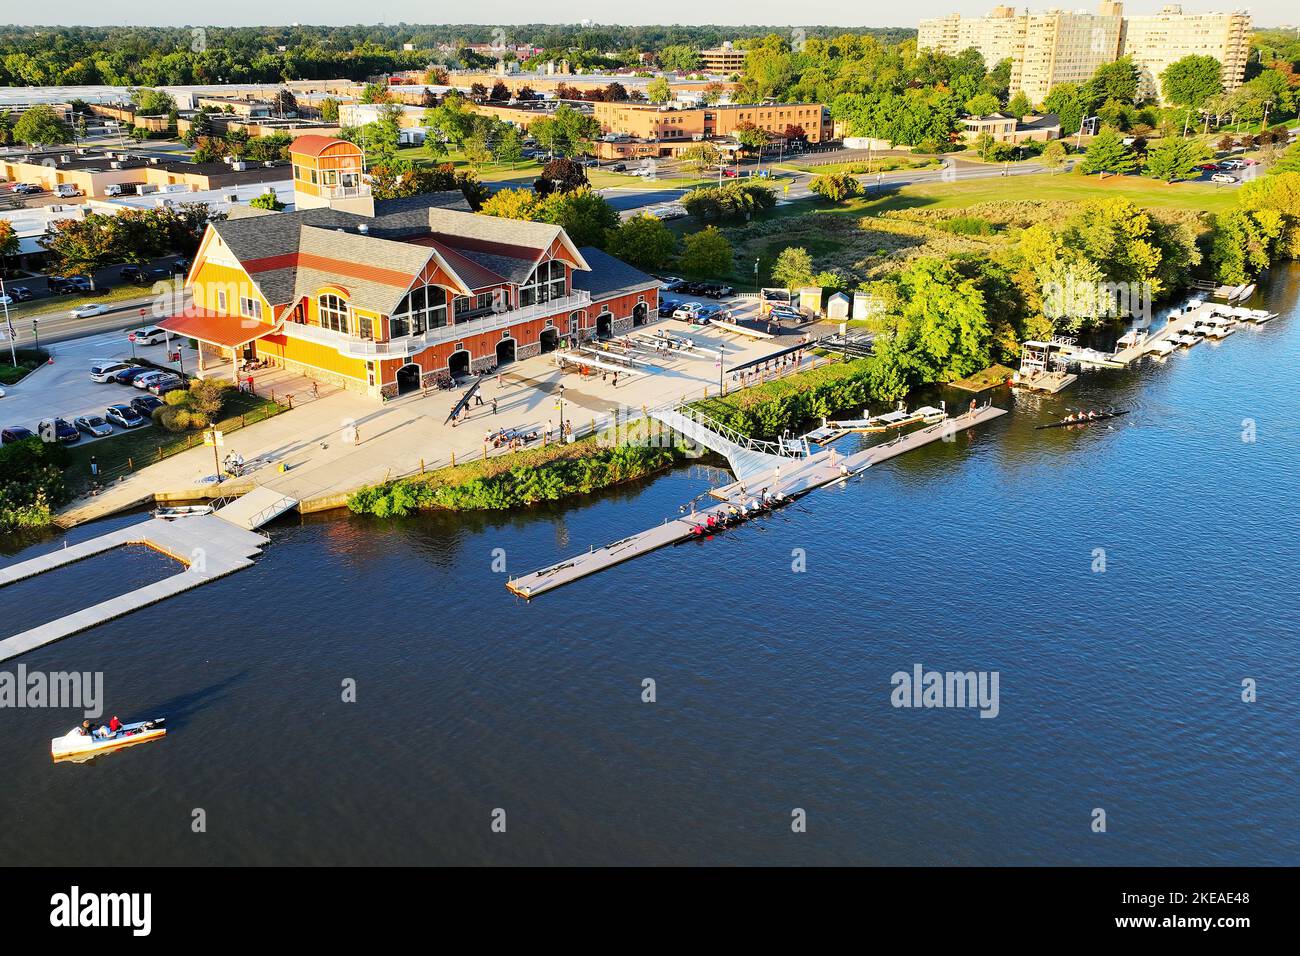 Aerial View of a Boathouse on a River Stock Photo